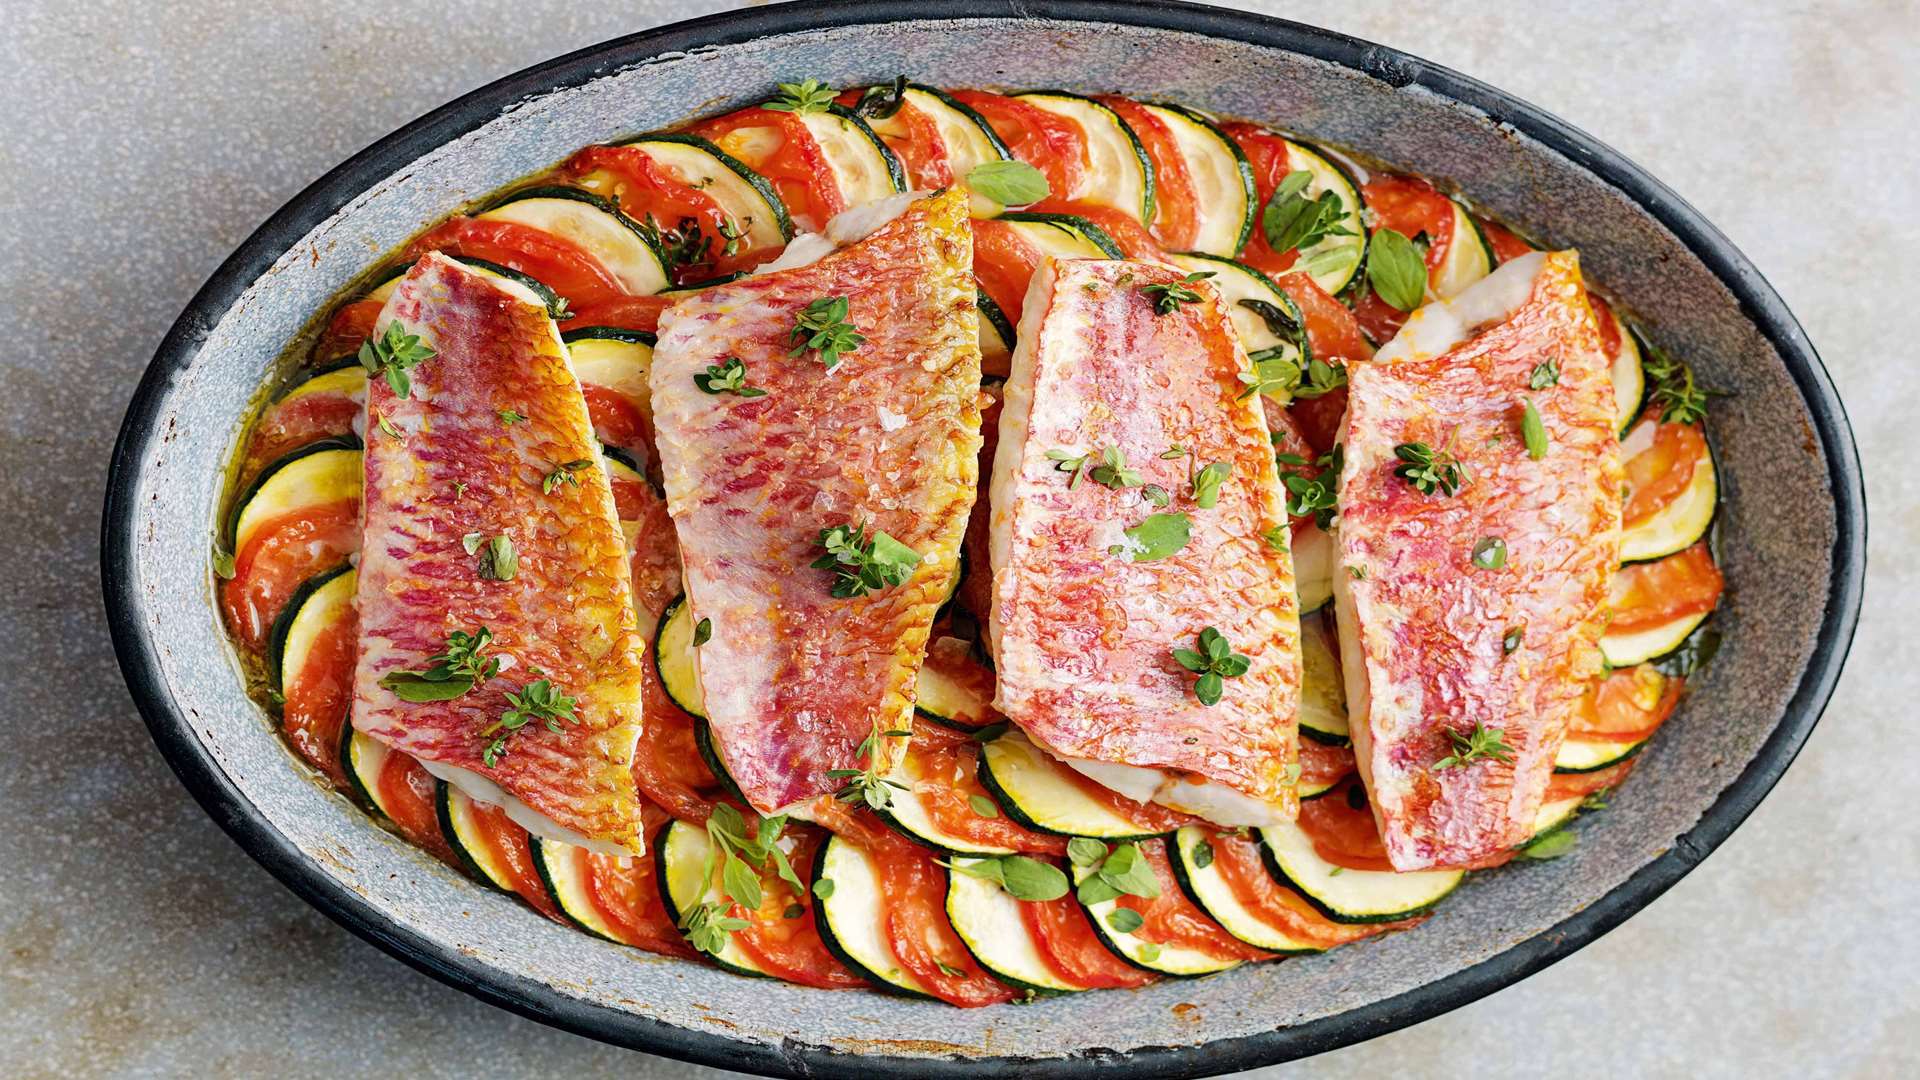 Red mullet on baked provencial vegtables from Tom Kerridge's Best Ever Dishes